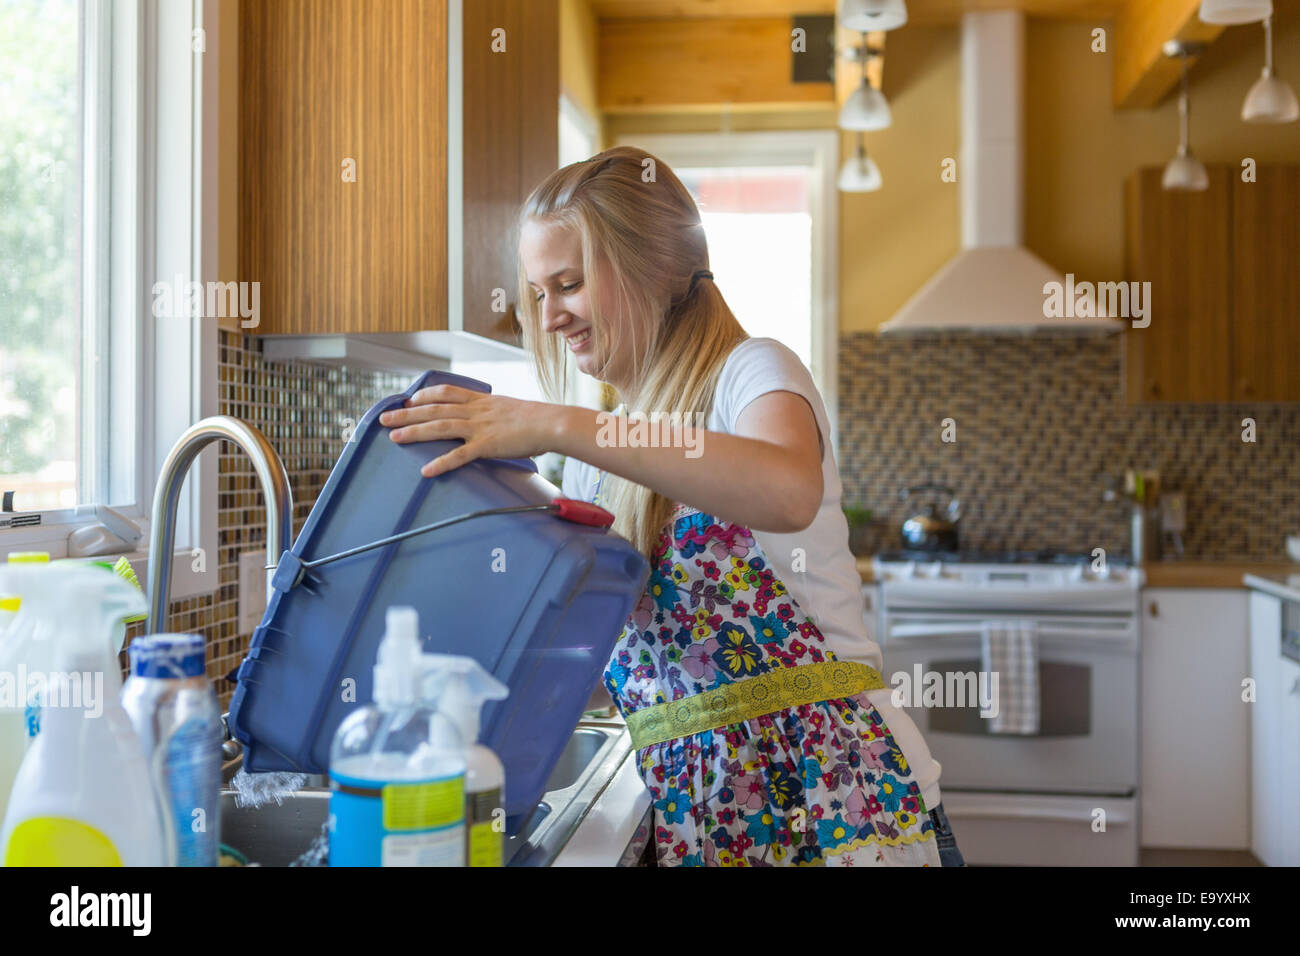 Young woman cleaning kitchen with green cleaning products Stock Photo